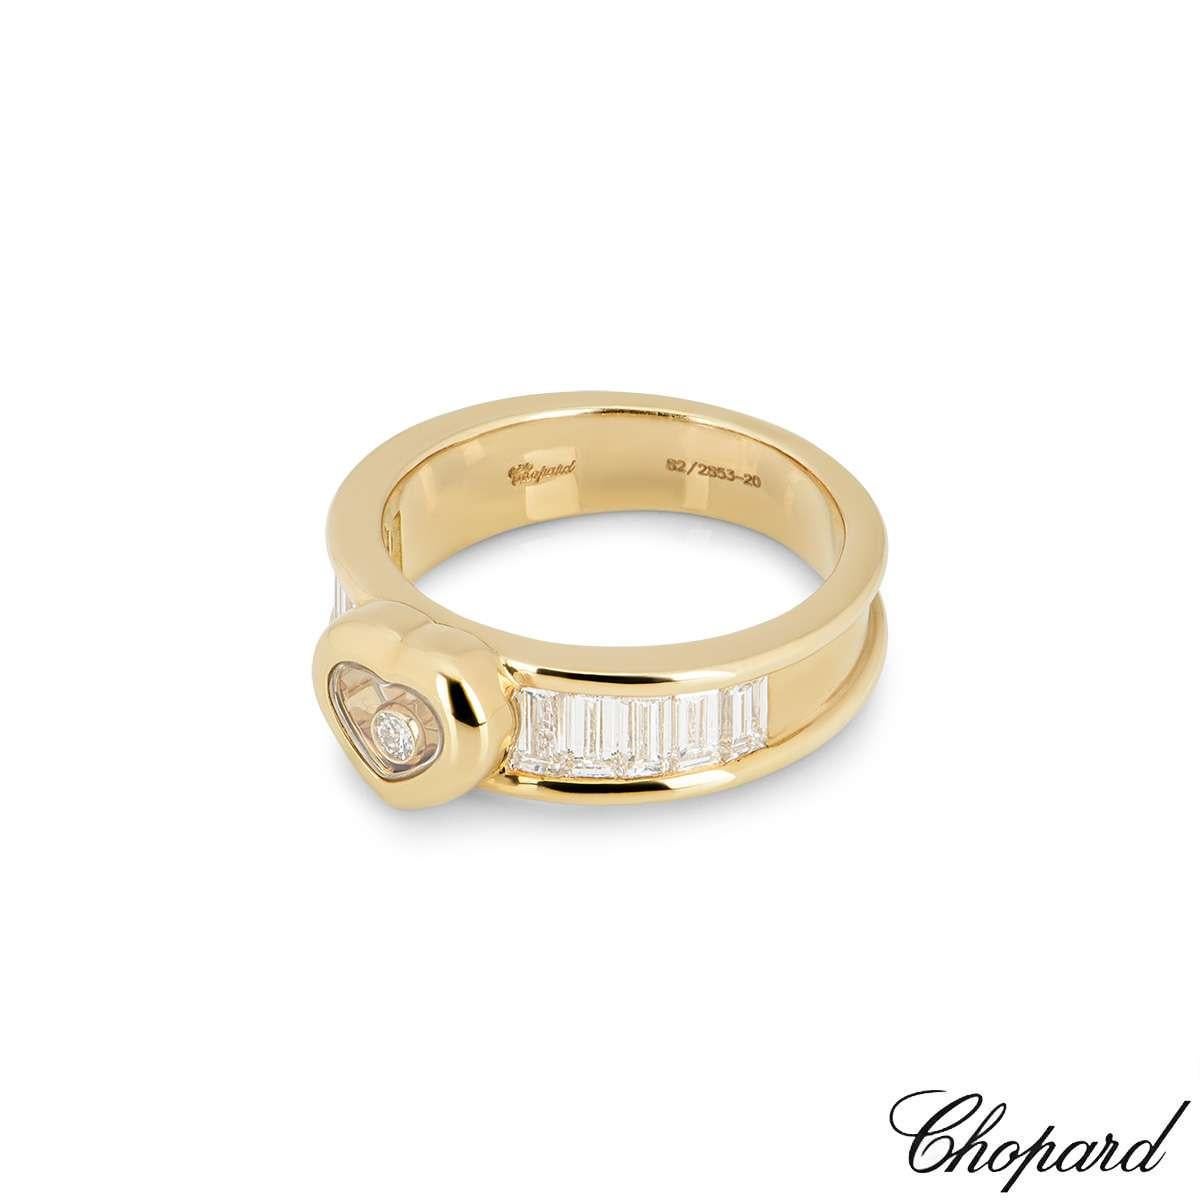 Chopard Yellow Gold Happy Diamond Heart Ring 82/2853-20 In Excellent Condition In London, GB